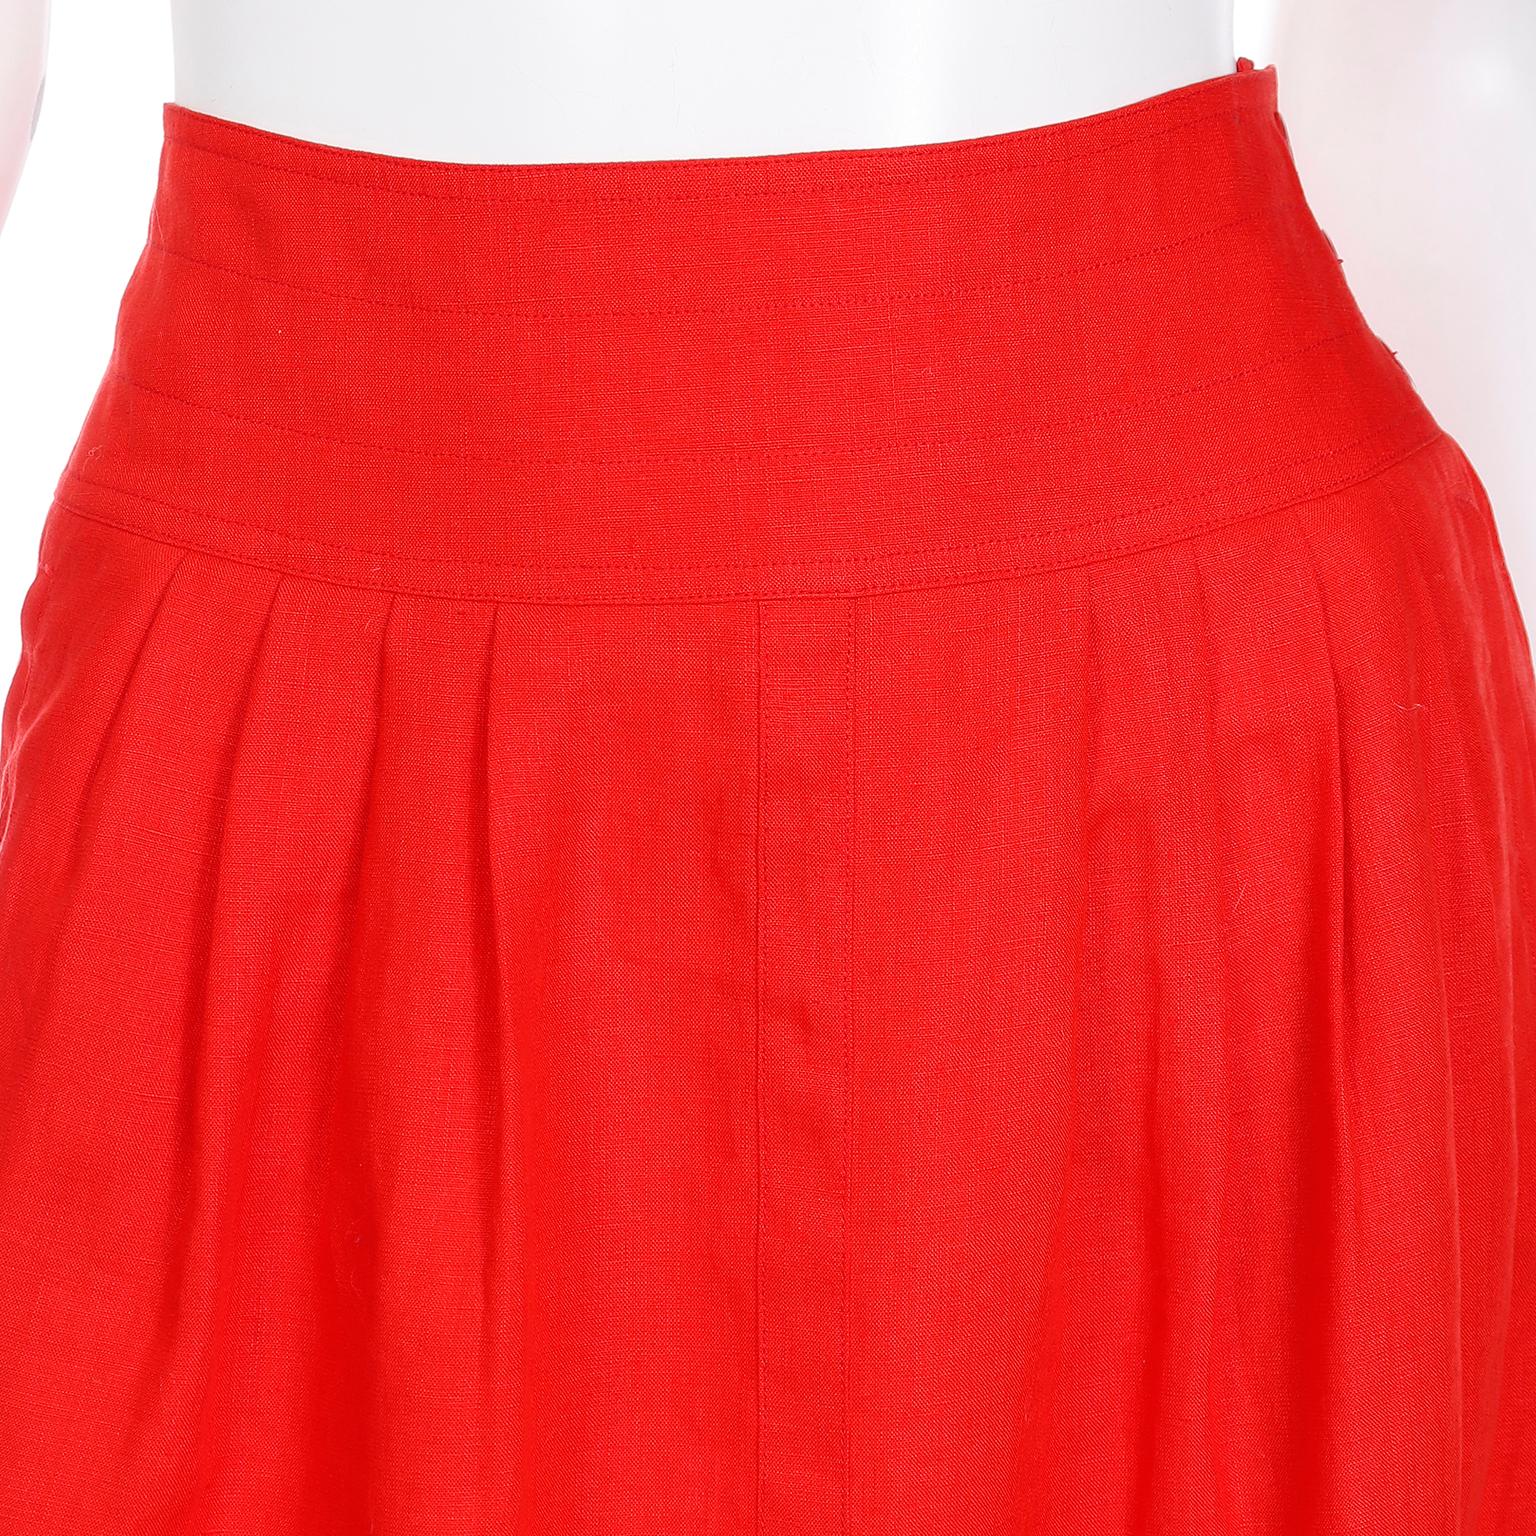 1980s G Gucci Tomato Red 100% Linen Vintage Skirt For Sale 1